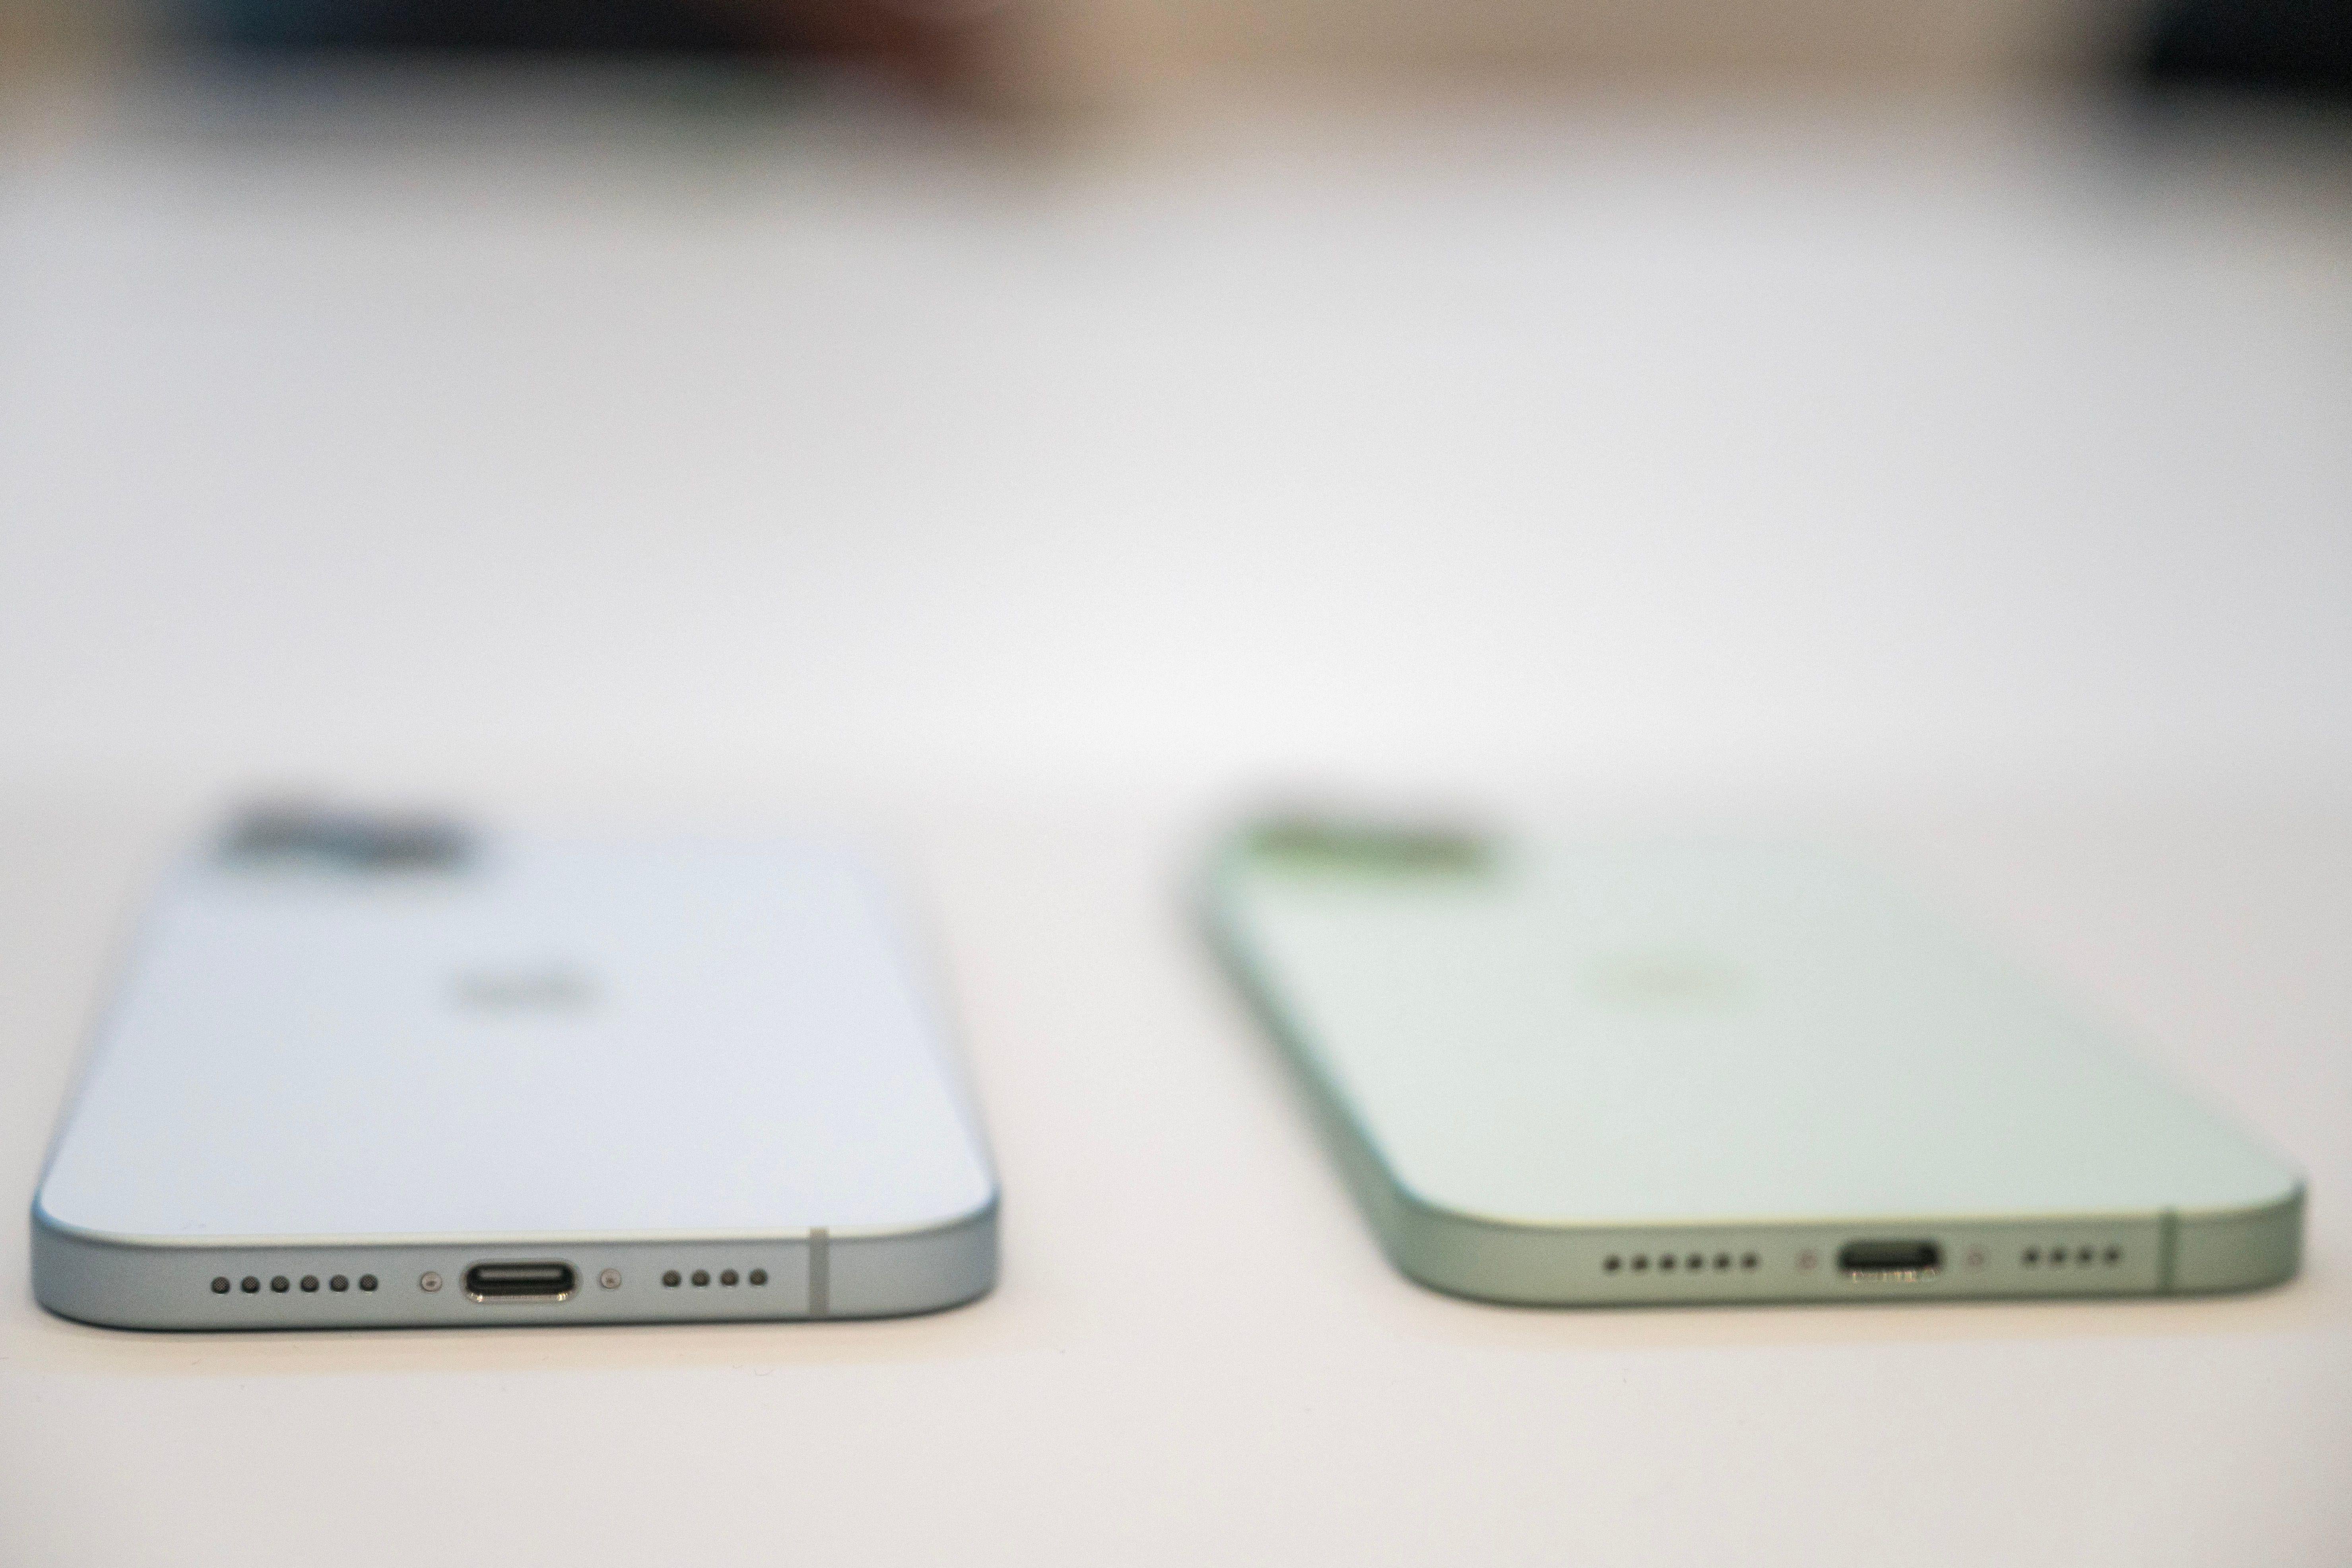 Two blurry face-down iPhones, with the focus clearer around their USB-C charging ports